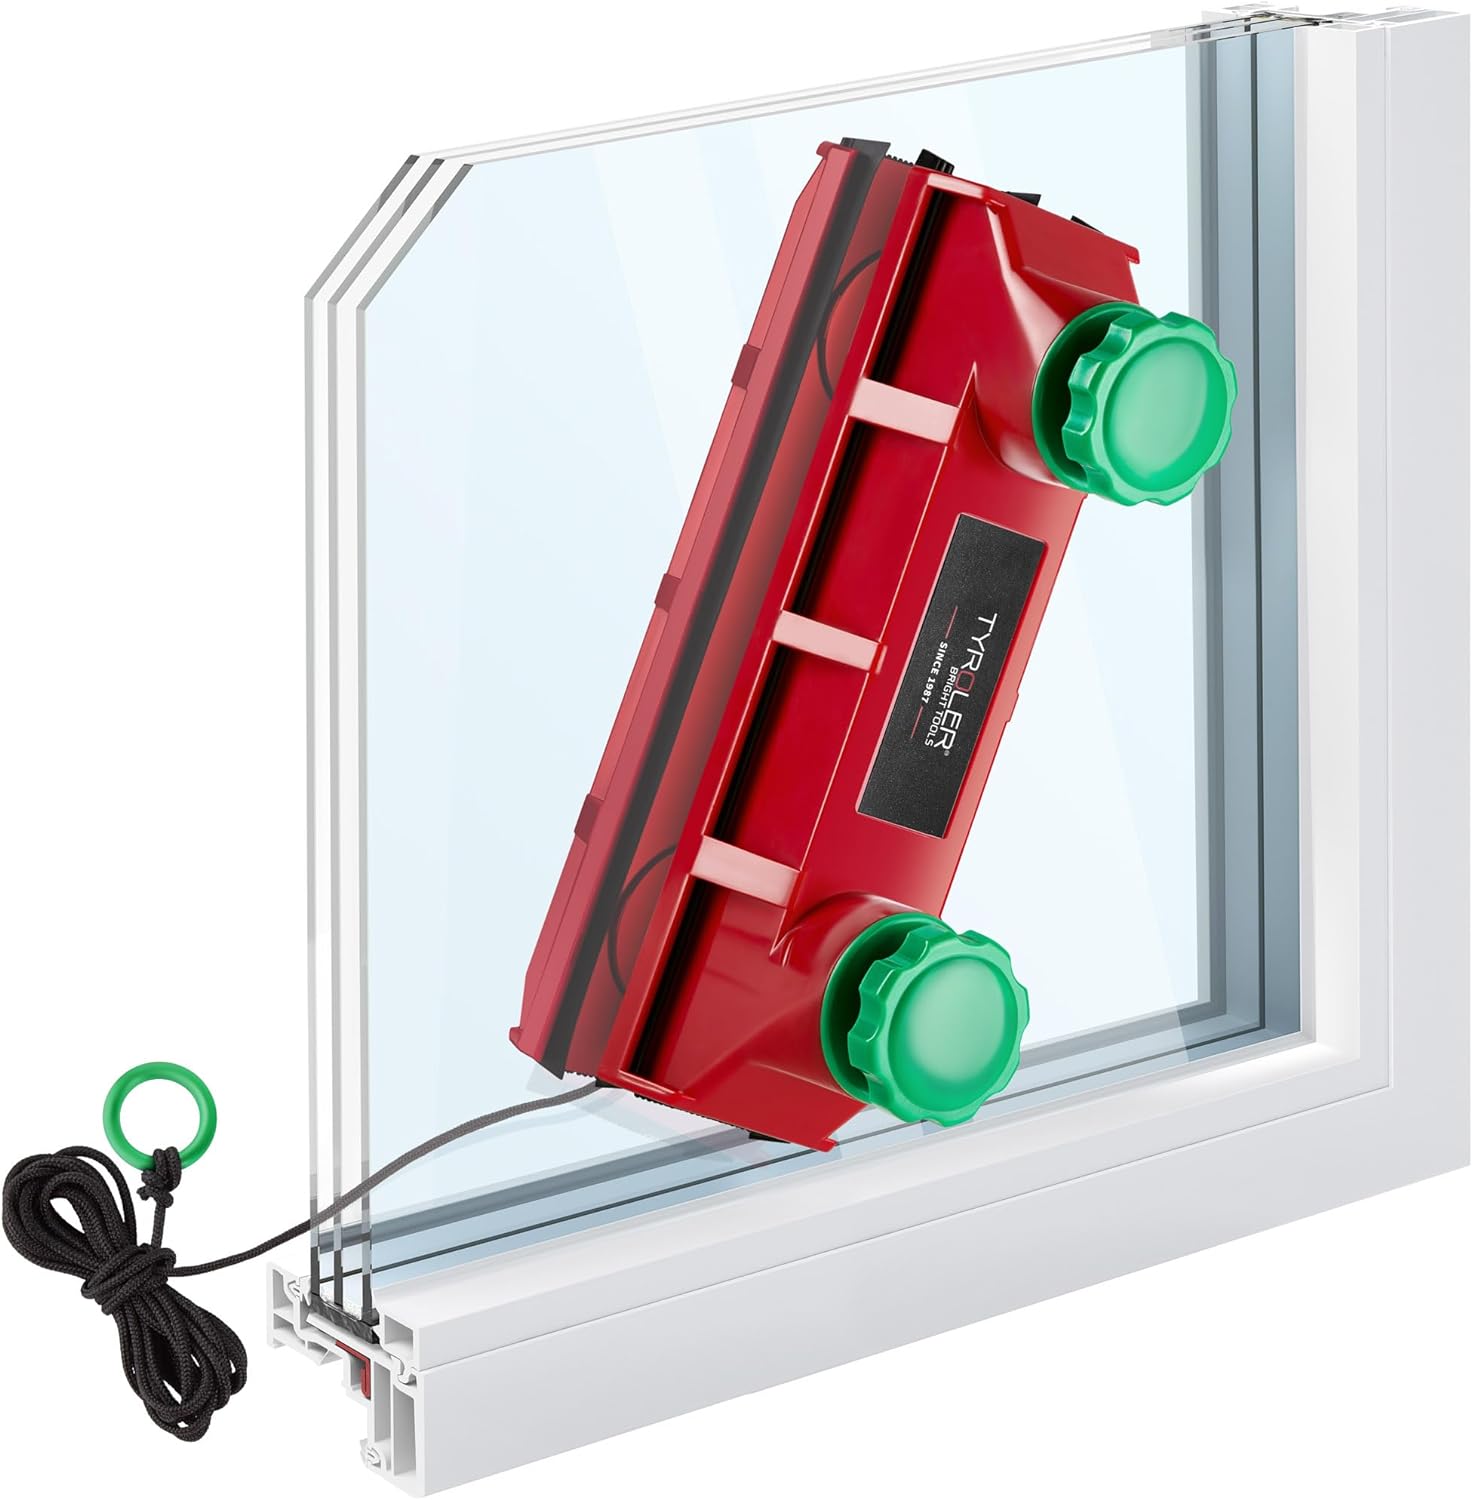 Tyroler-Bright-Tools-Universal-Magnetic-Window Cleaner is shown on the corner of a window.